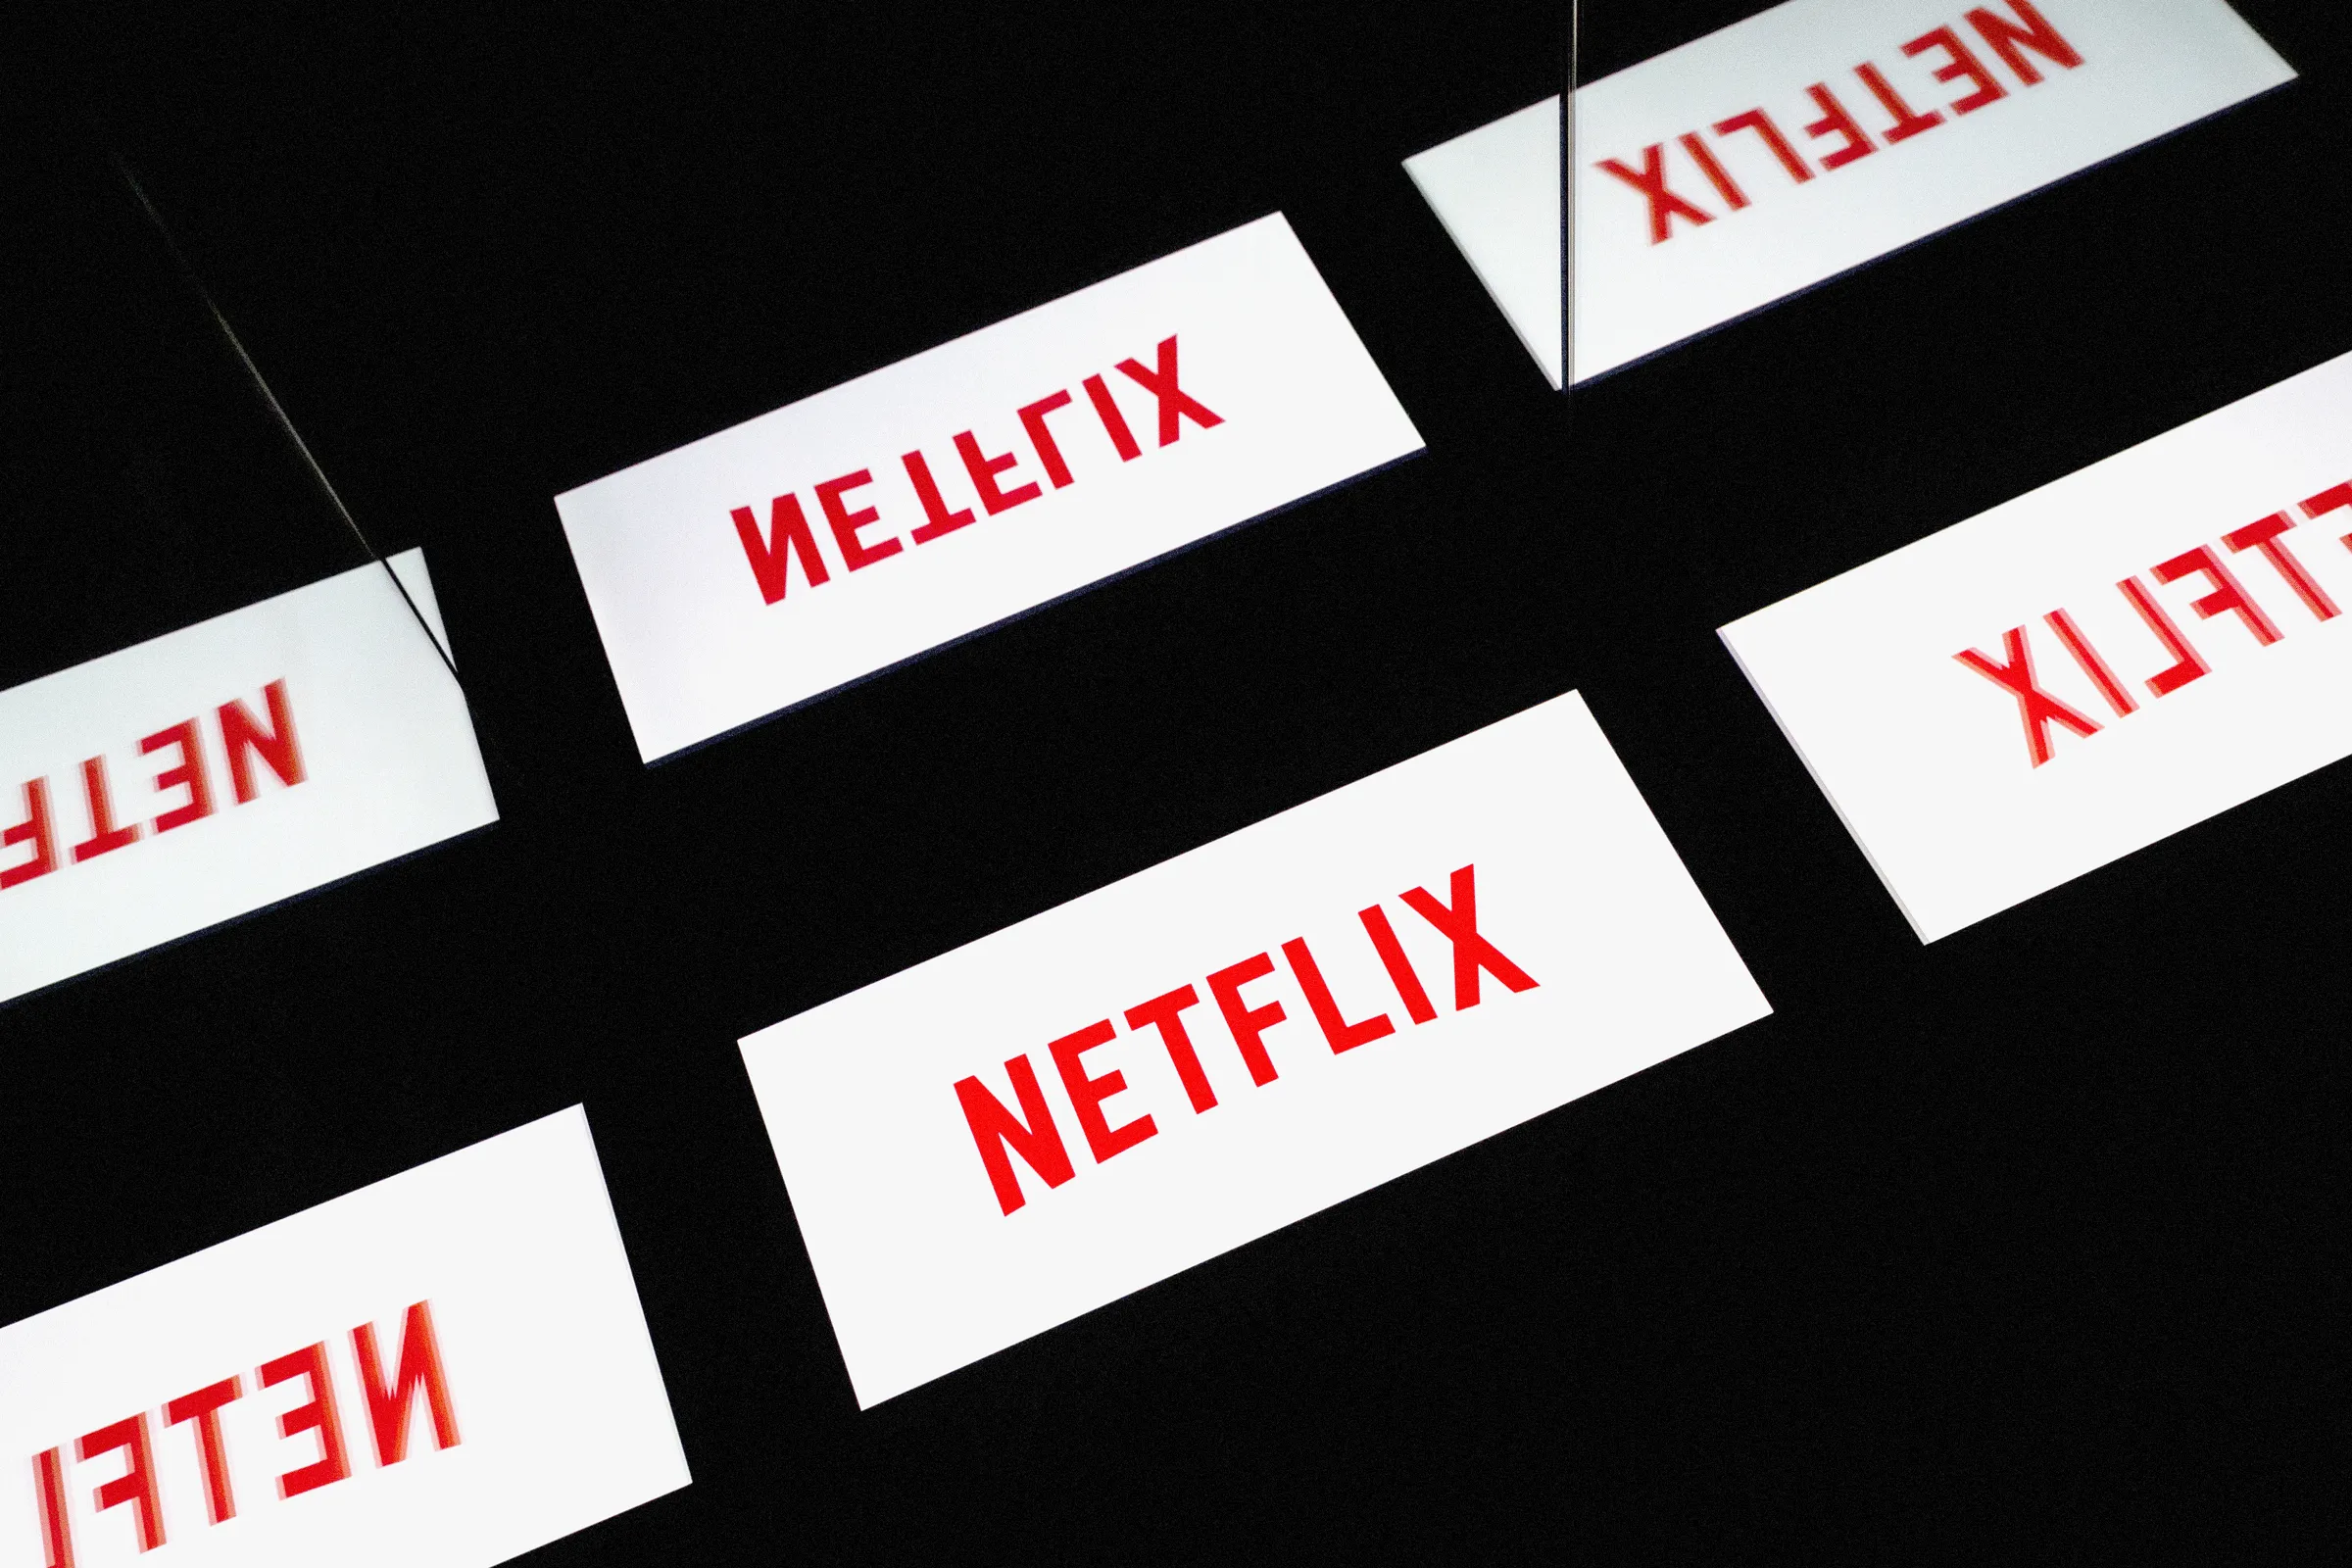 Netflix hinted at a global crackdown on password sharing as its subscribers keep dropping at an alarming rate.